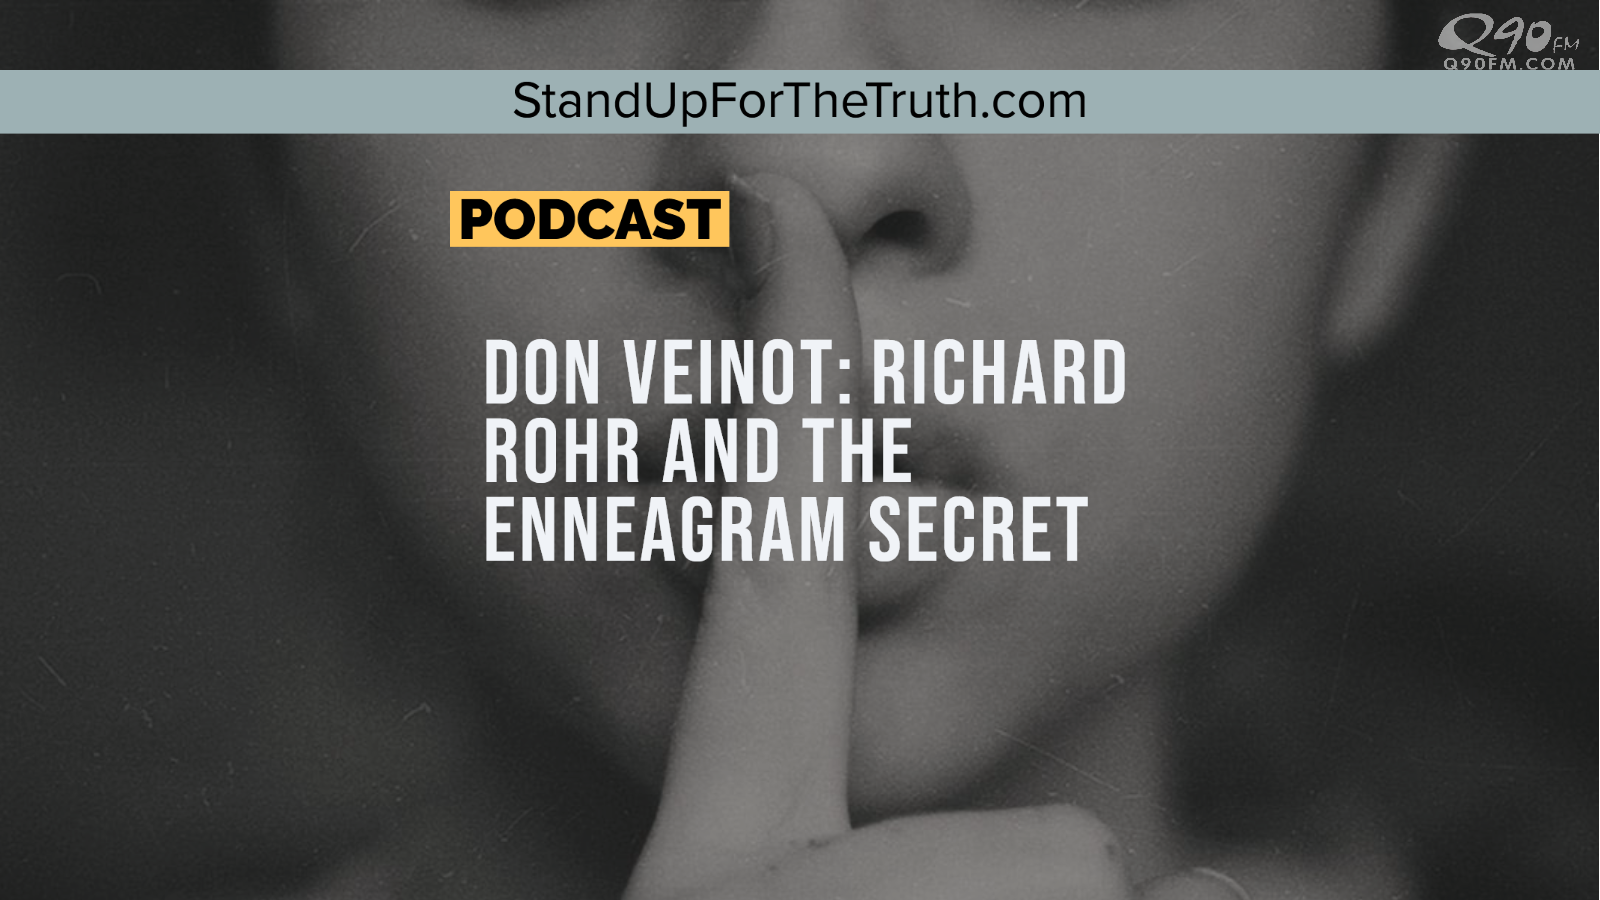 Don Veinot: Richard Rohr and the Enneagram Secret - Stand Up For The Truth